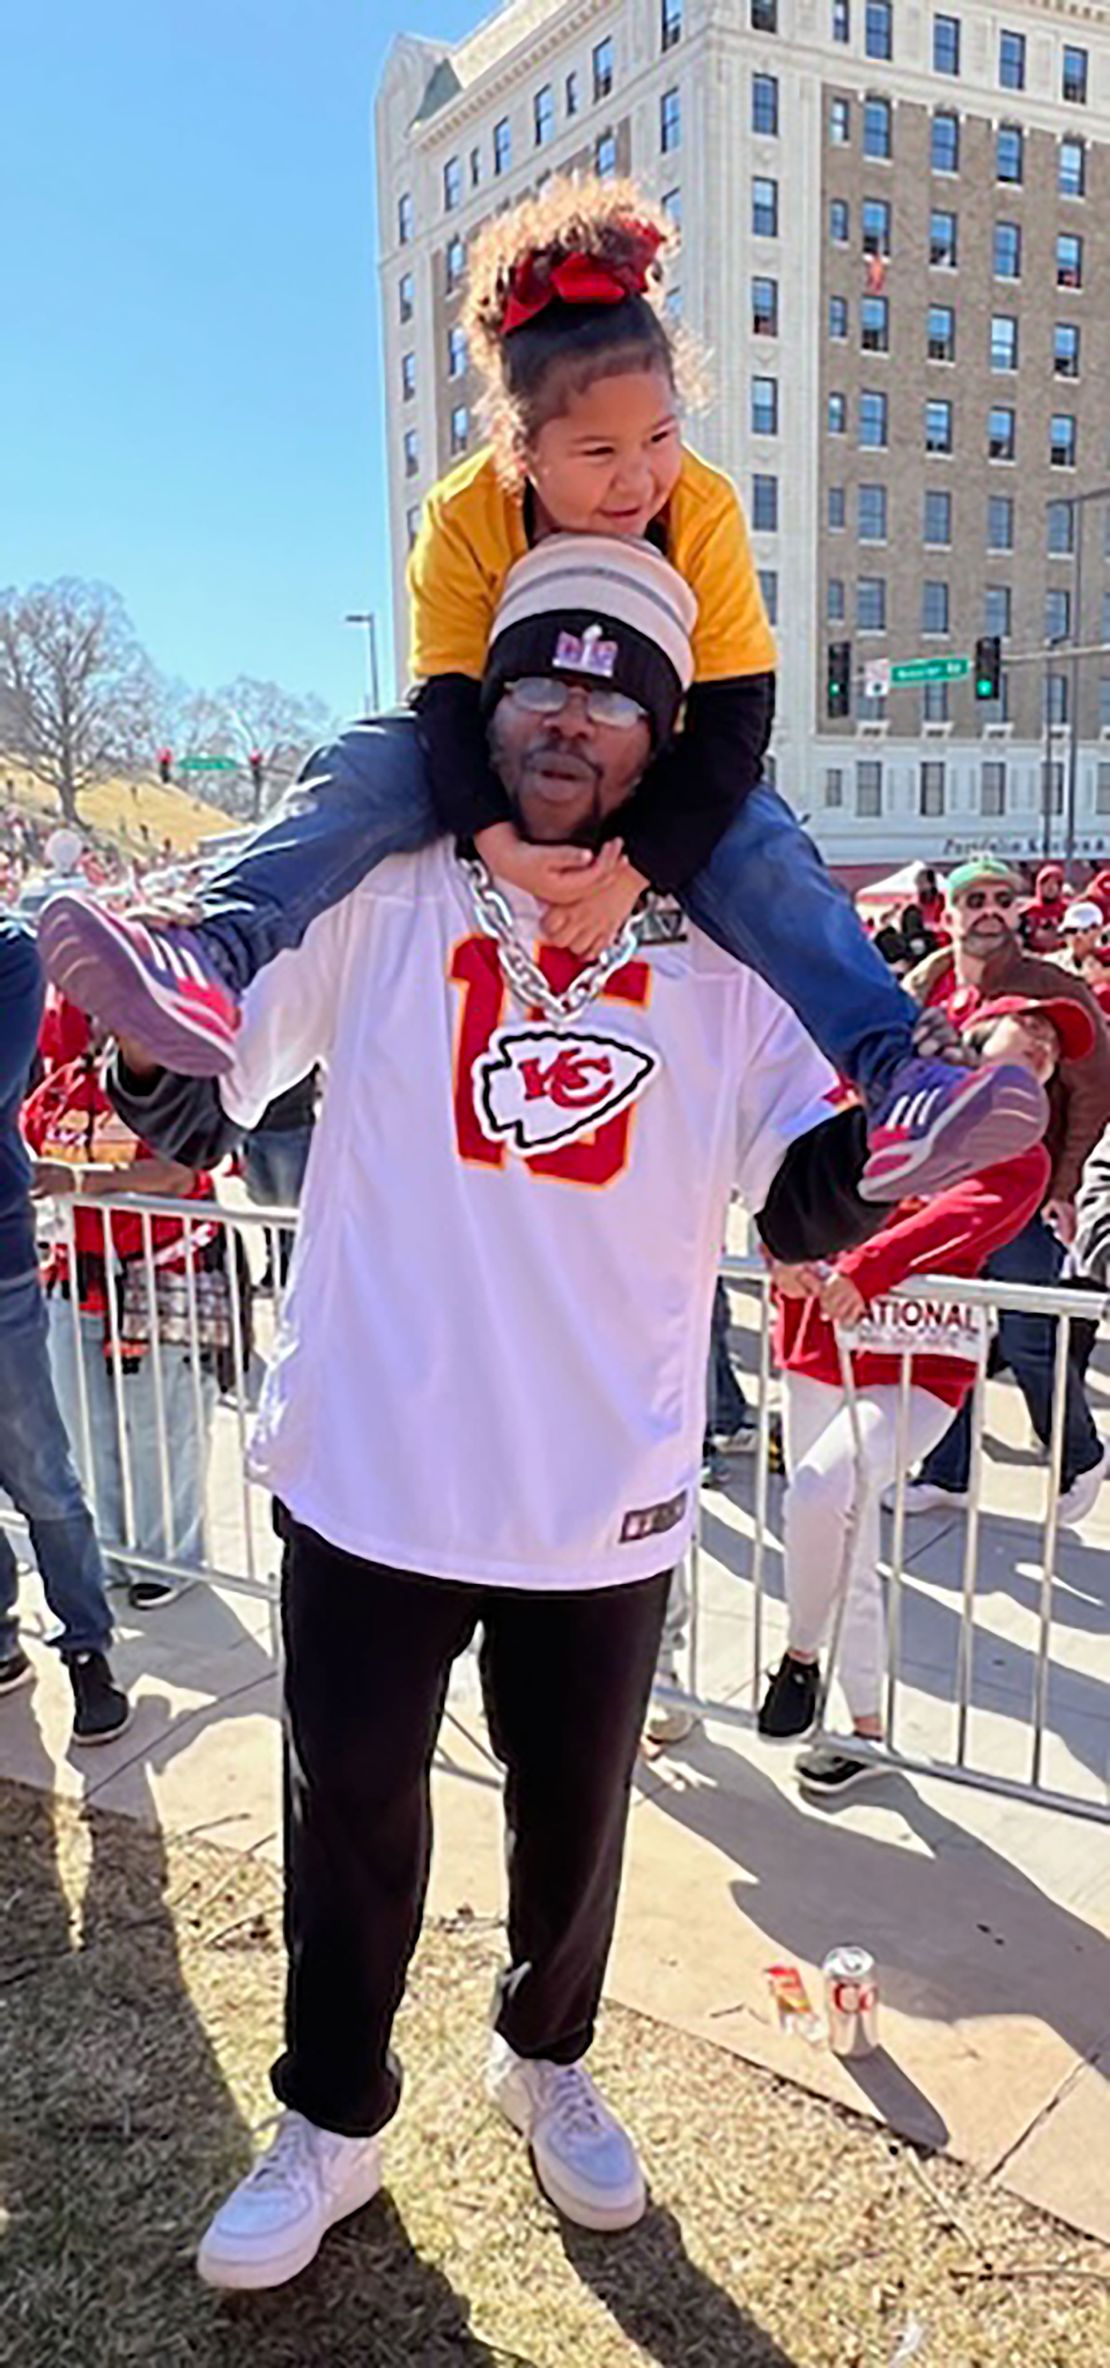 James Lemons was carrying daughter Kensley on his shoulders at the Kansas City Chiefs Super Bowl parade when he felt a bullet enter the back of his right thigh. He says his first thought amid the chaos was getting his family to safety.